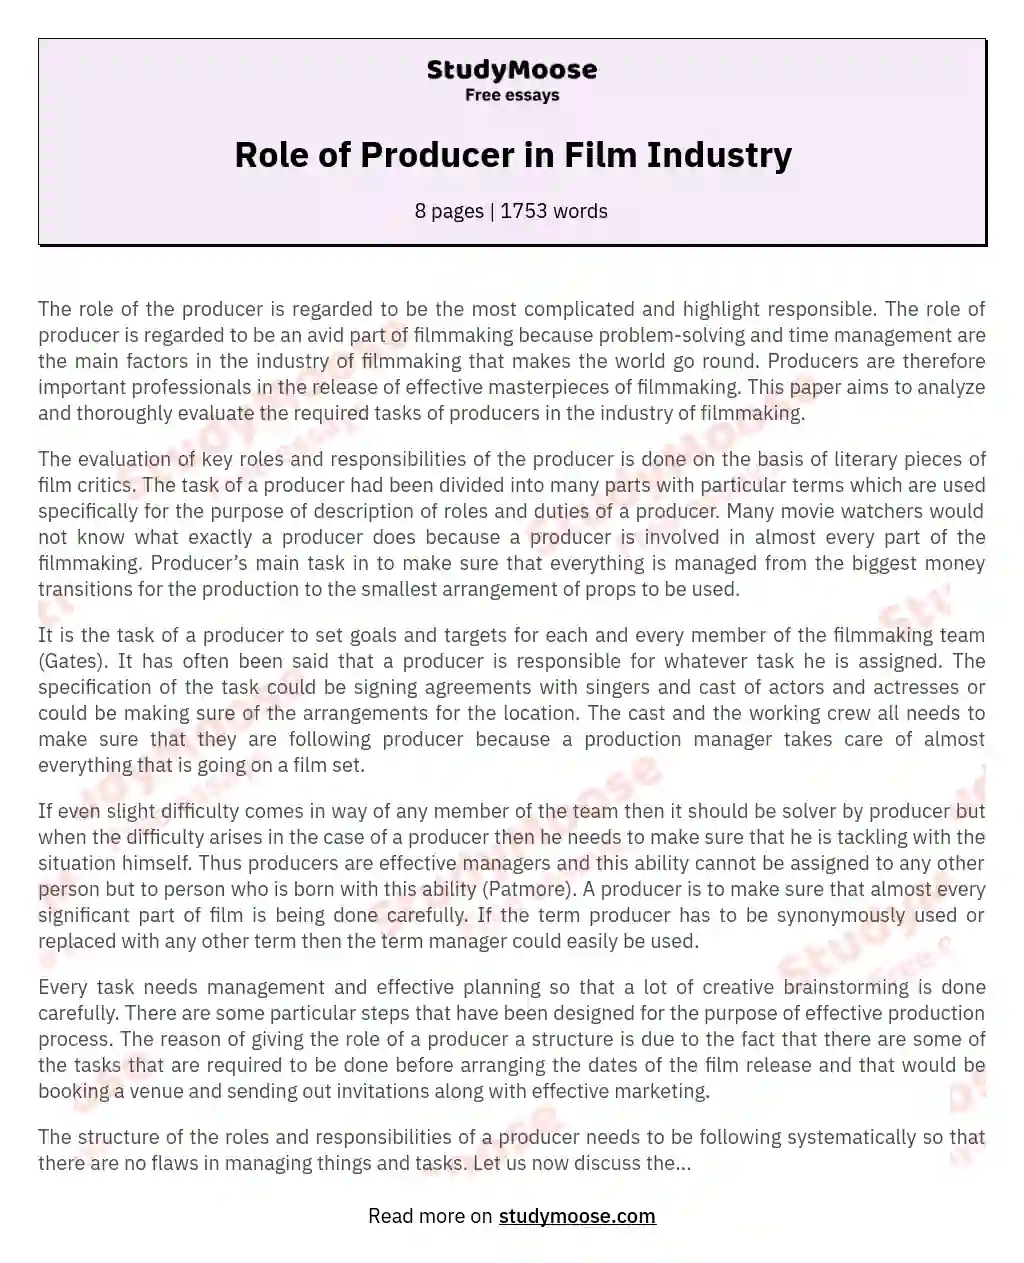 Role of Producer in Film Industry essay